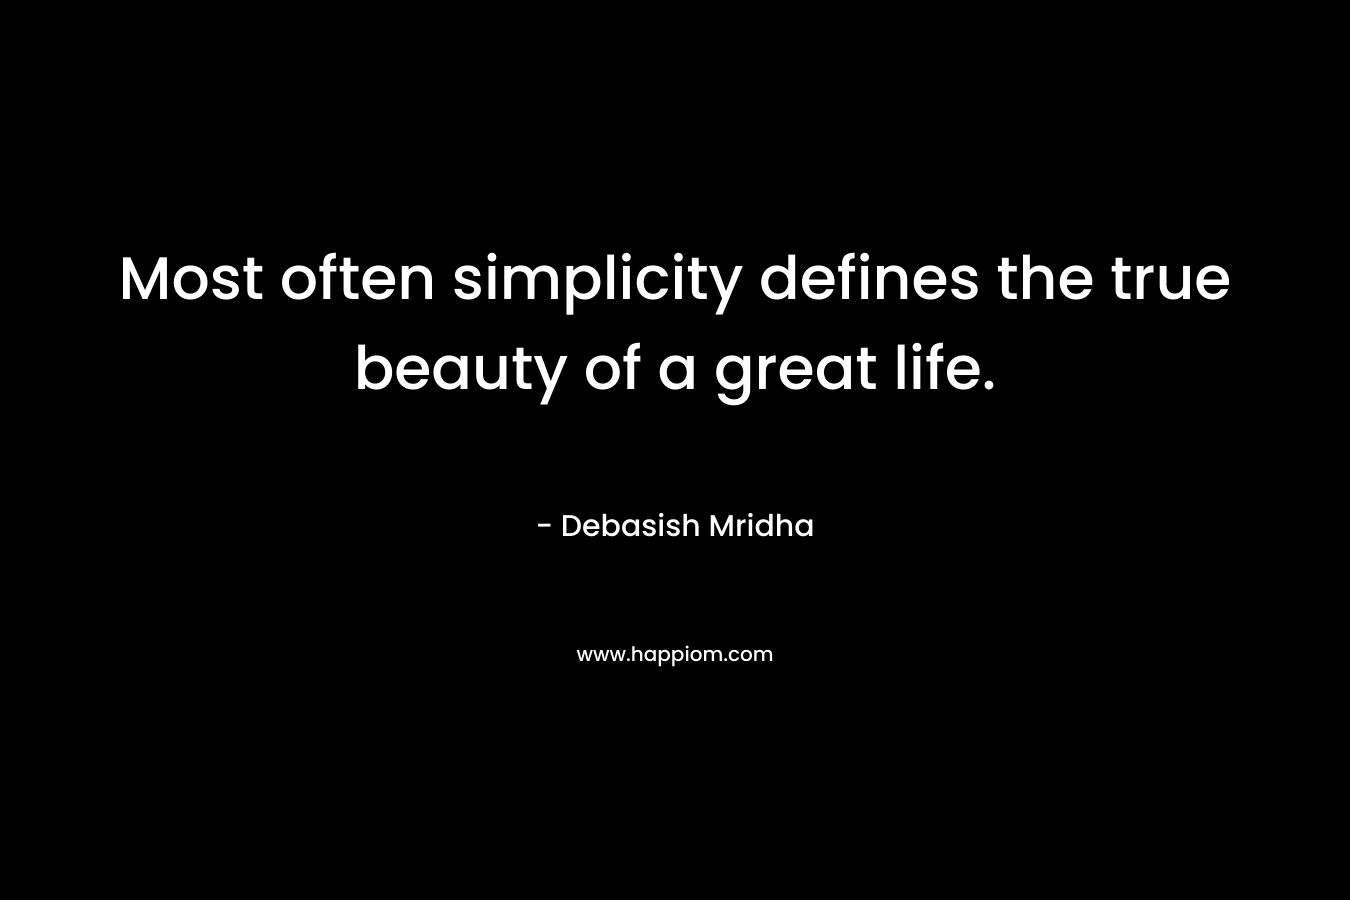 Most often simplicity defines the true beauty of a great life.